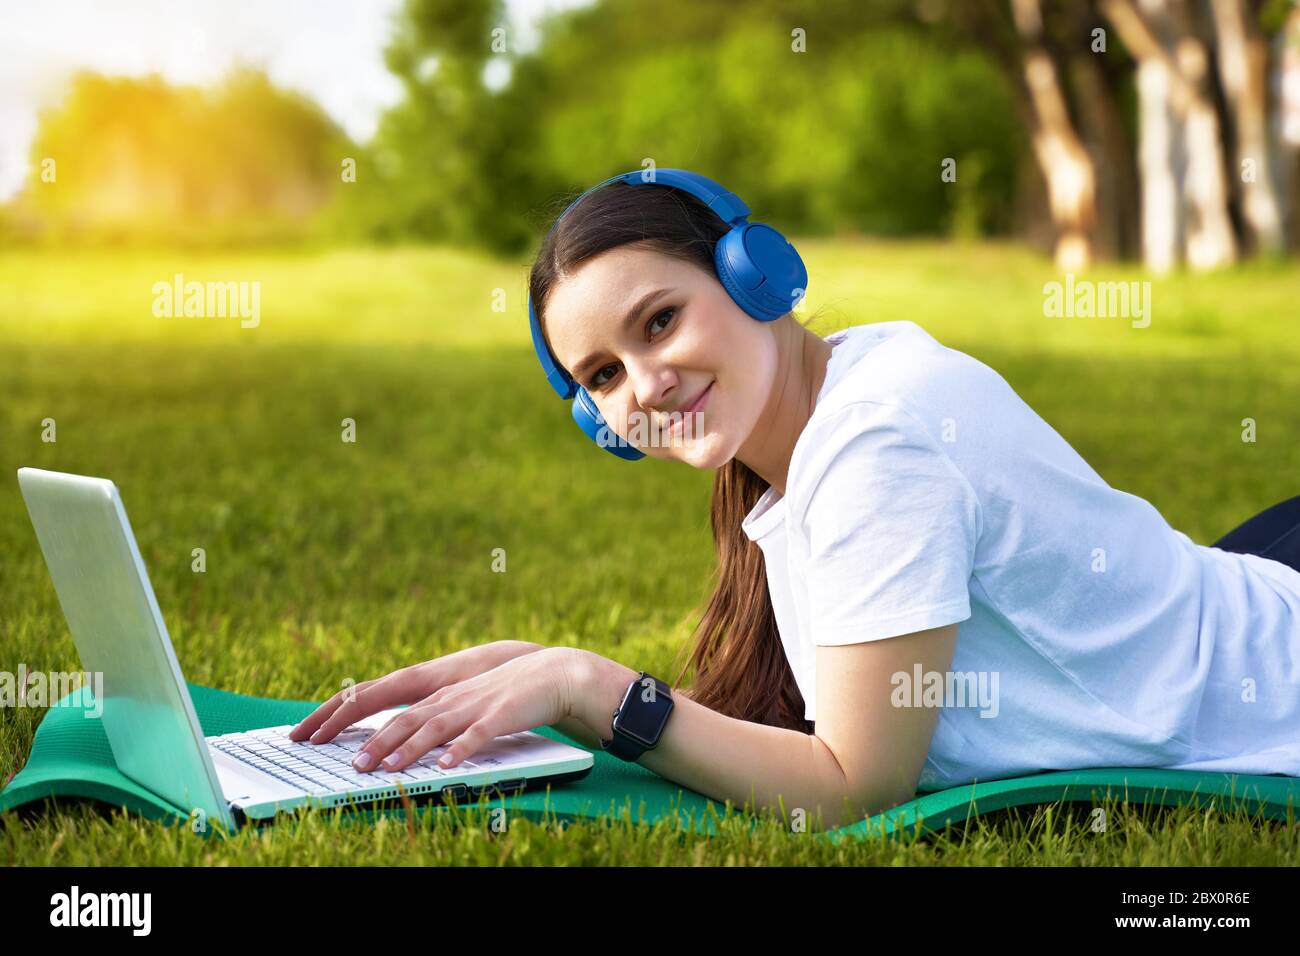 athletic healthy girl in the headphones working in nature Stock Photo